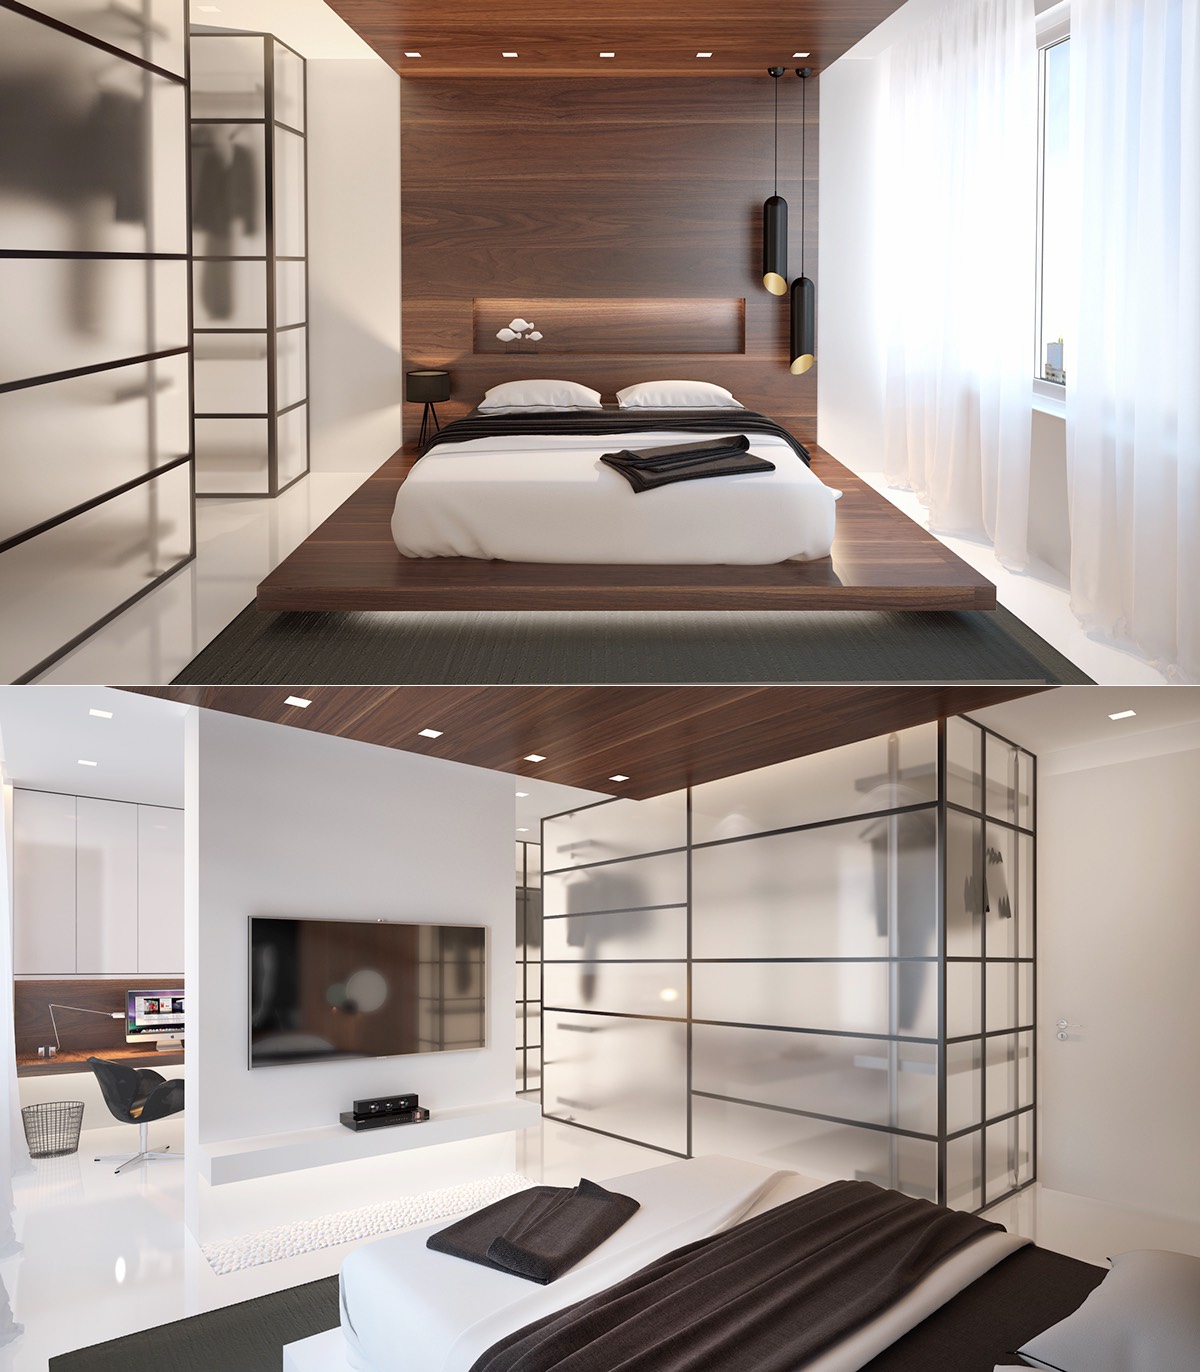 Design of a small bedroom "width =" 1200 "height =" 1372 "srcset =" https://mileray.com/wp-content/uploads/2020/05/1588509352_69_40-Bedroom-Designs-Include-With-Furniture-Placement-and-Decorating-Ideas.jpg 1200w, https: / / mileray.com/wp-content/uploads/2016/04/colorful-woven-baskets-1-262x300.jpg 262w, https://mileray.com/wp-content/uploads/2016/04/colorful-woven- baskets -1-768x878.jpg 768w, https://mileray.com/wp-content/uploads/2016/04/colorful-woven-baskets-1-896x1024.jpg 896w, https://mileray.com/wp- content /uploads/2016/04/colorful-woven-baskets-1-696x796.jpg 696w, https://mileray.com/wp-content/uploads/2016/04/colorful-woven-baskets-1-1068x1221.jpg 1068w, https://mileray.com/wp-content/uploads/2016/04/colorful-woven-baskets-1-367x420.jpg 367w "sizes =" (maximum width: 1200px) 100vw, 1200px